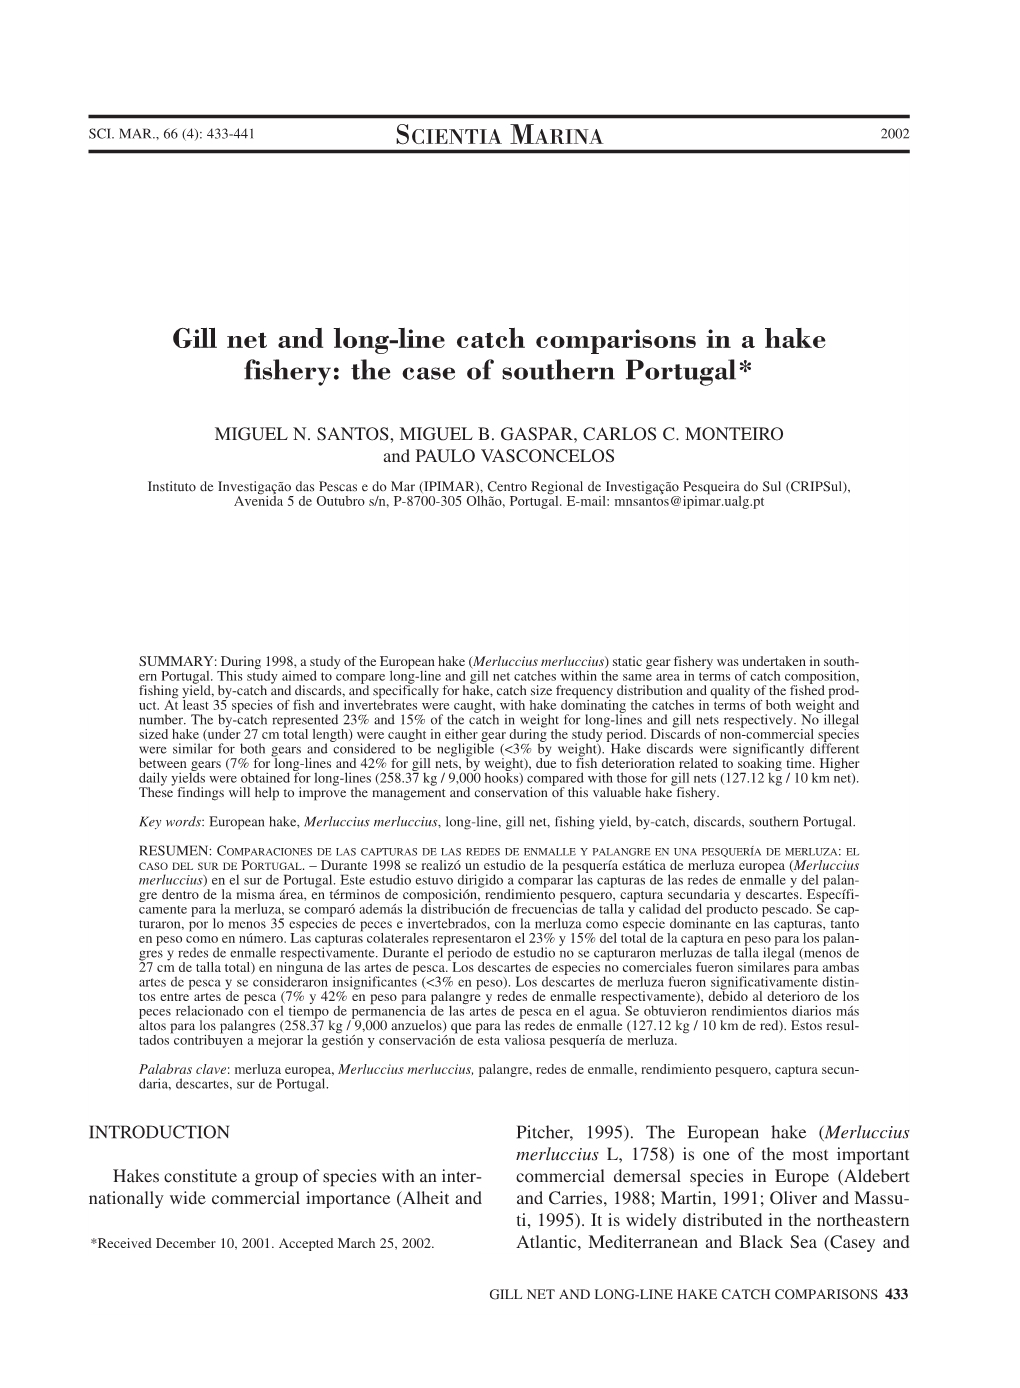 Gill Net and Long-Line Catch Comparisons in a Hake Fishery: the Case of Southern Portugal*